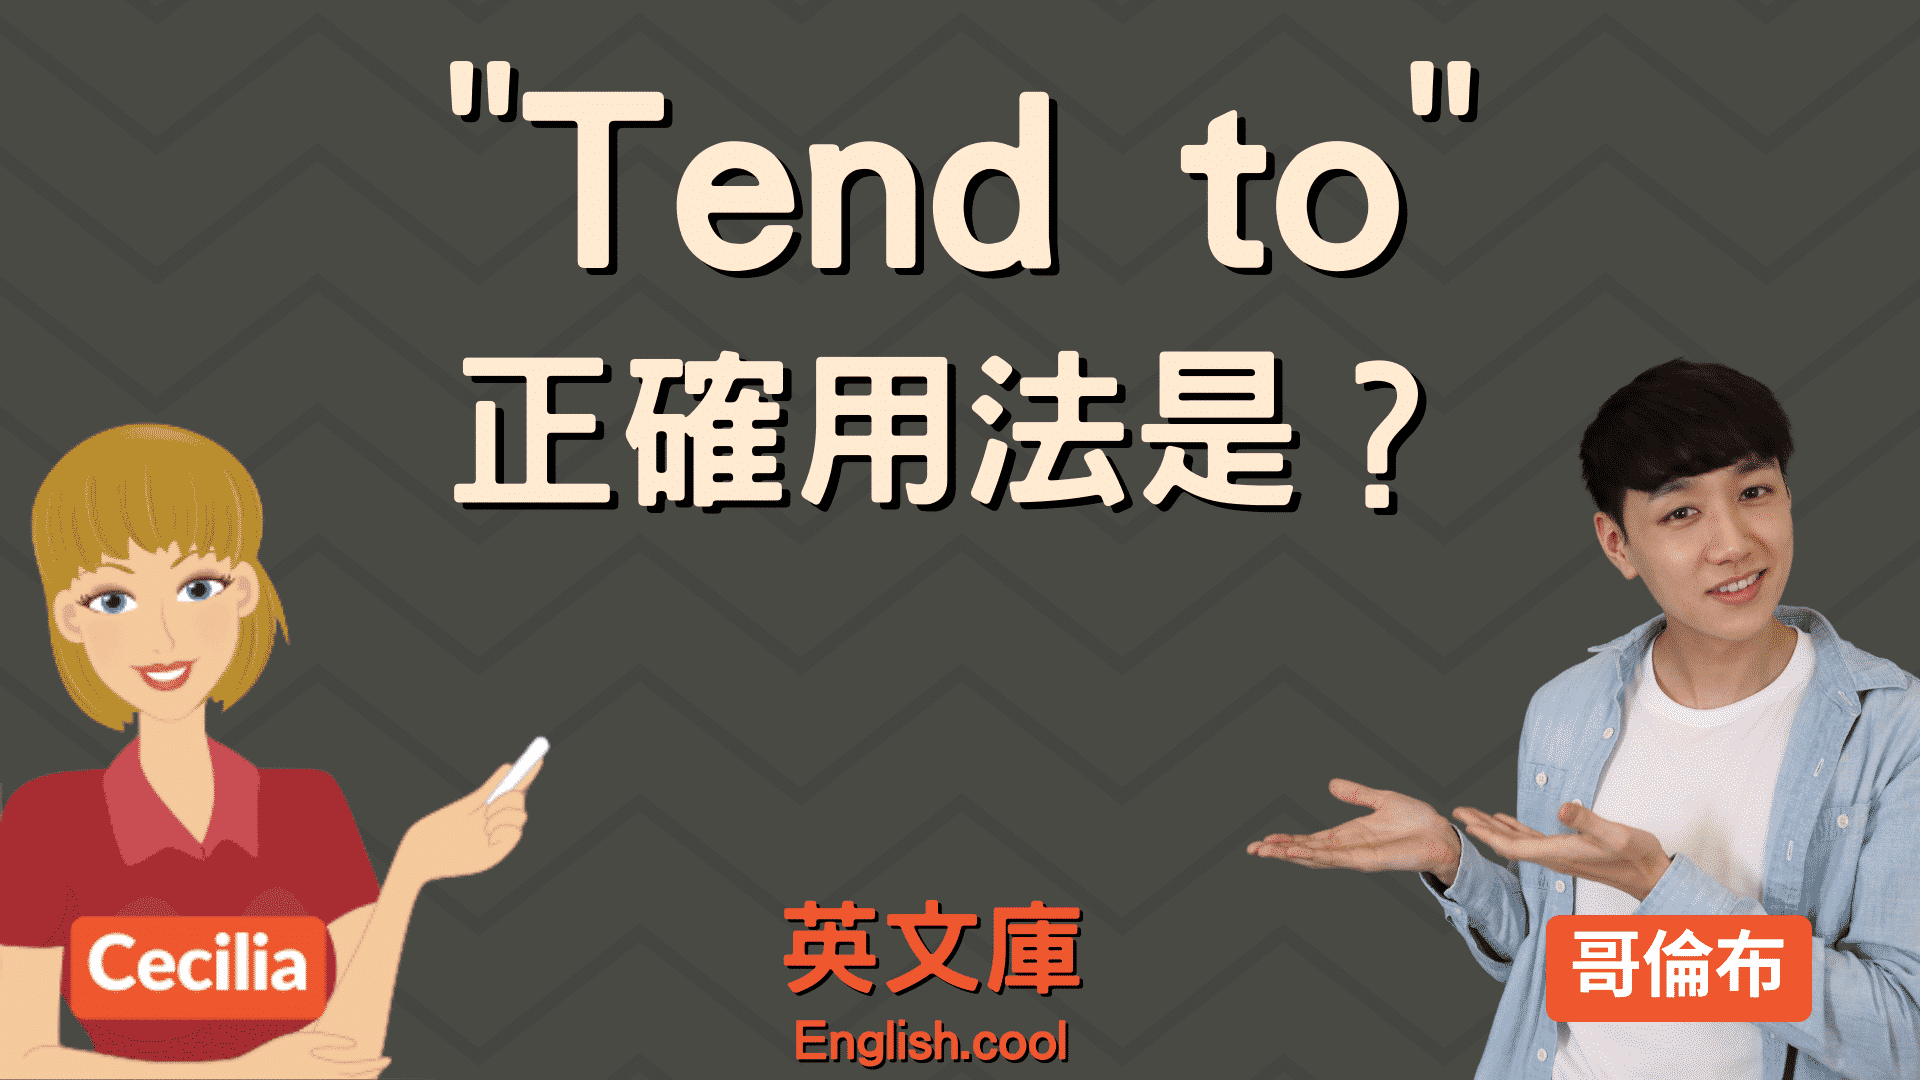 You are currently viewing 「tend to」正確用法是？來看例句搞懂！